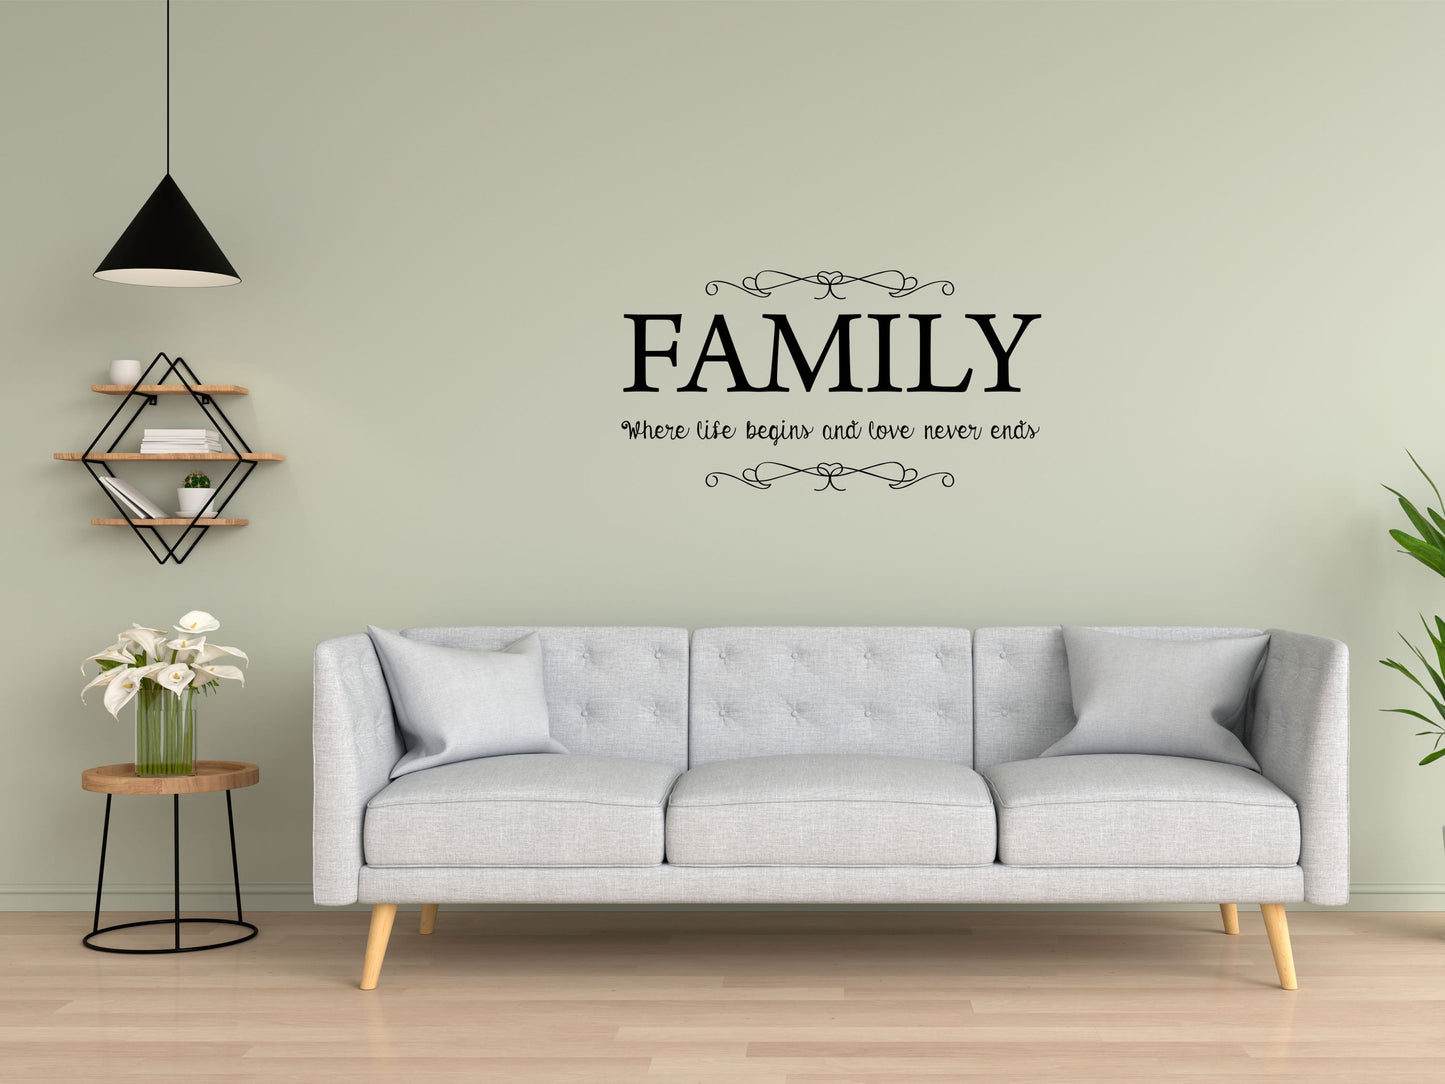 Family Where Life Begins And Love Never Ends - Inspirational Wall Decals Vinyl Wall Decal Inspirational Wall Signs 